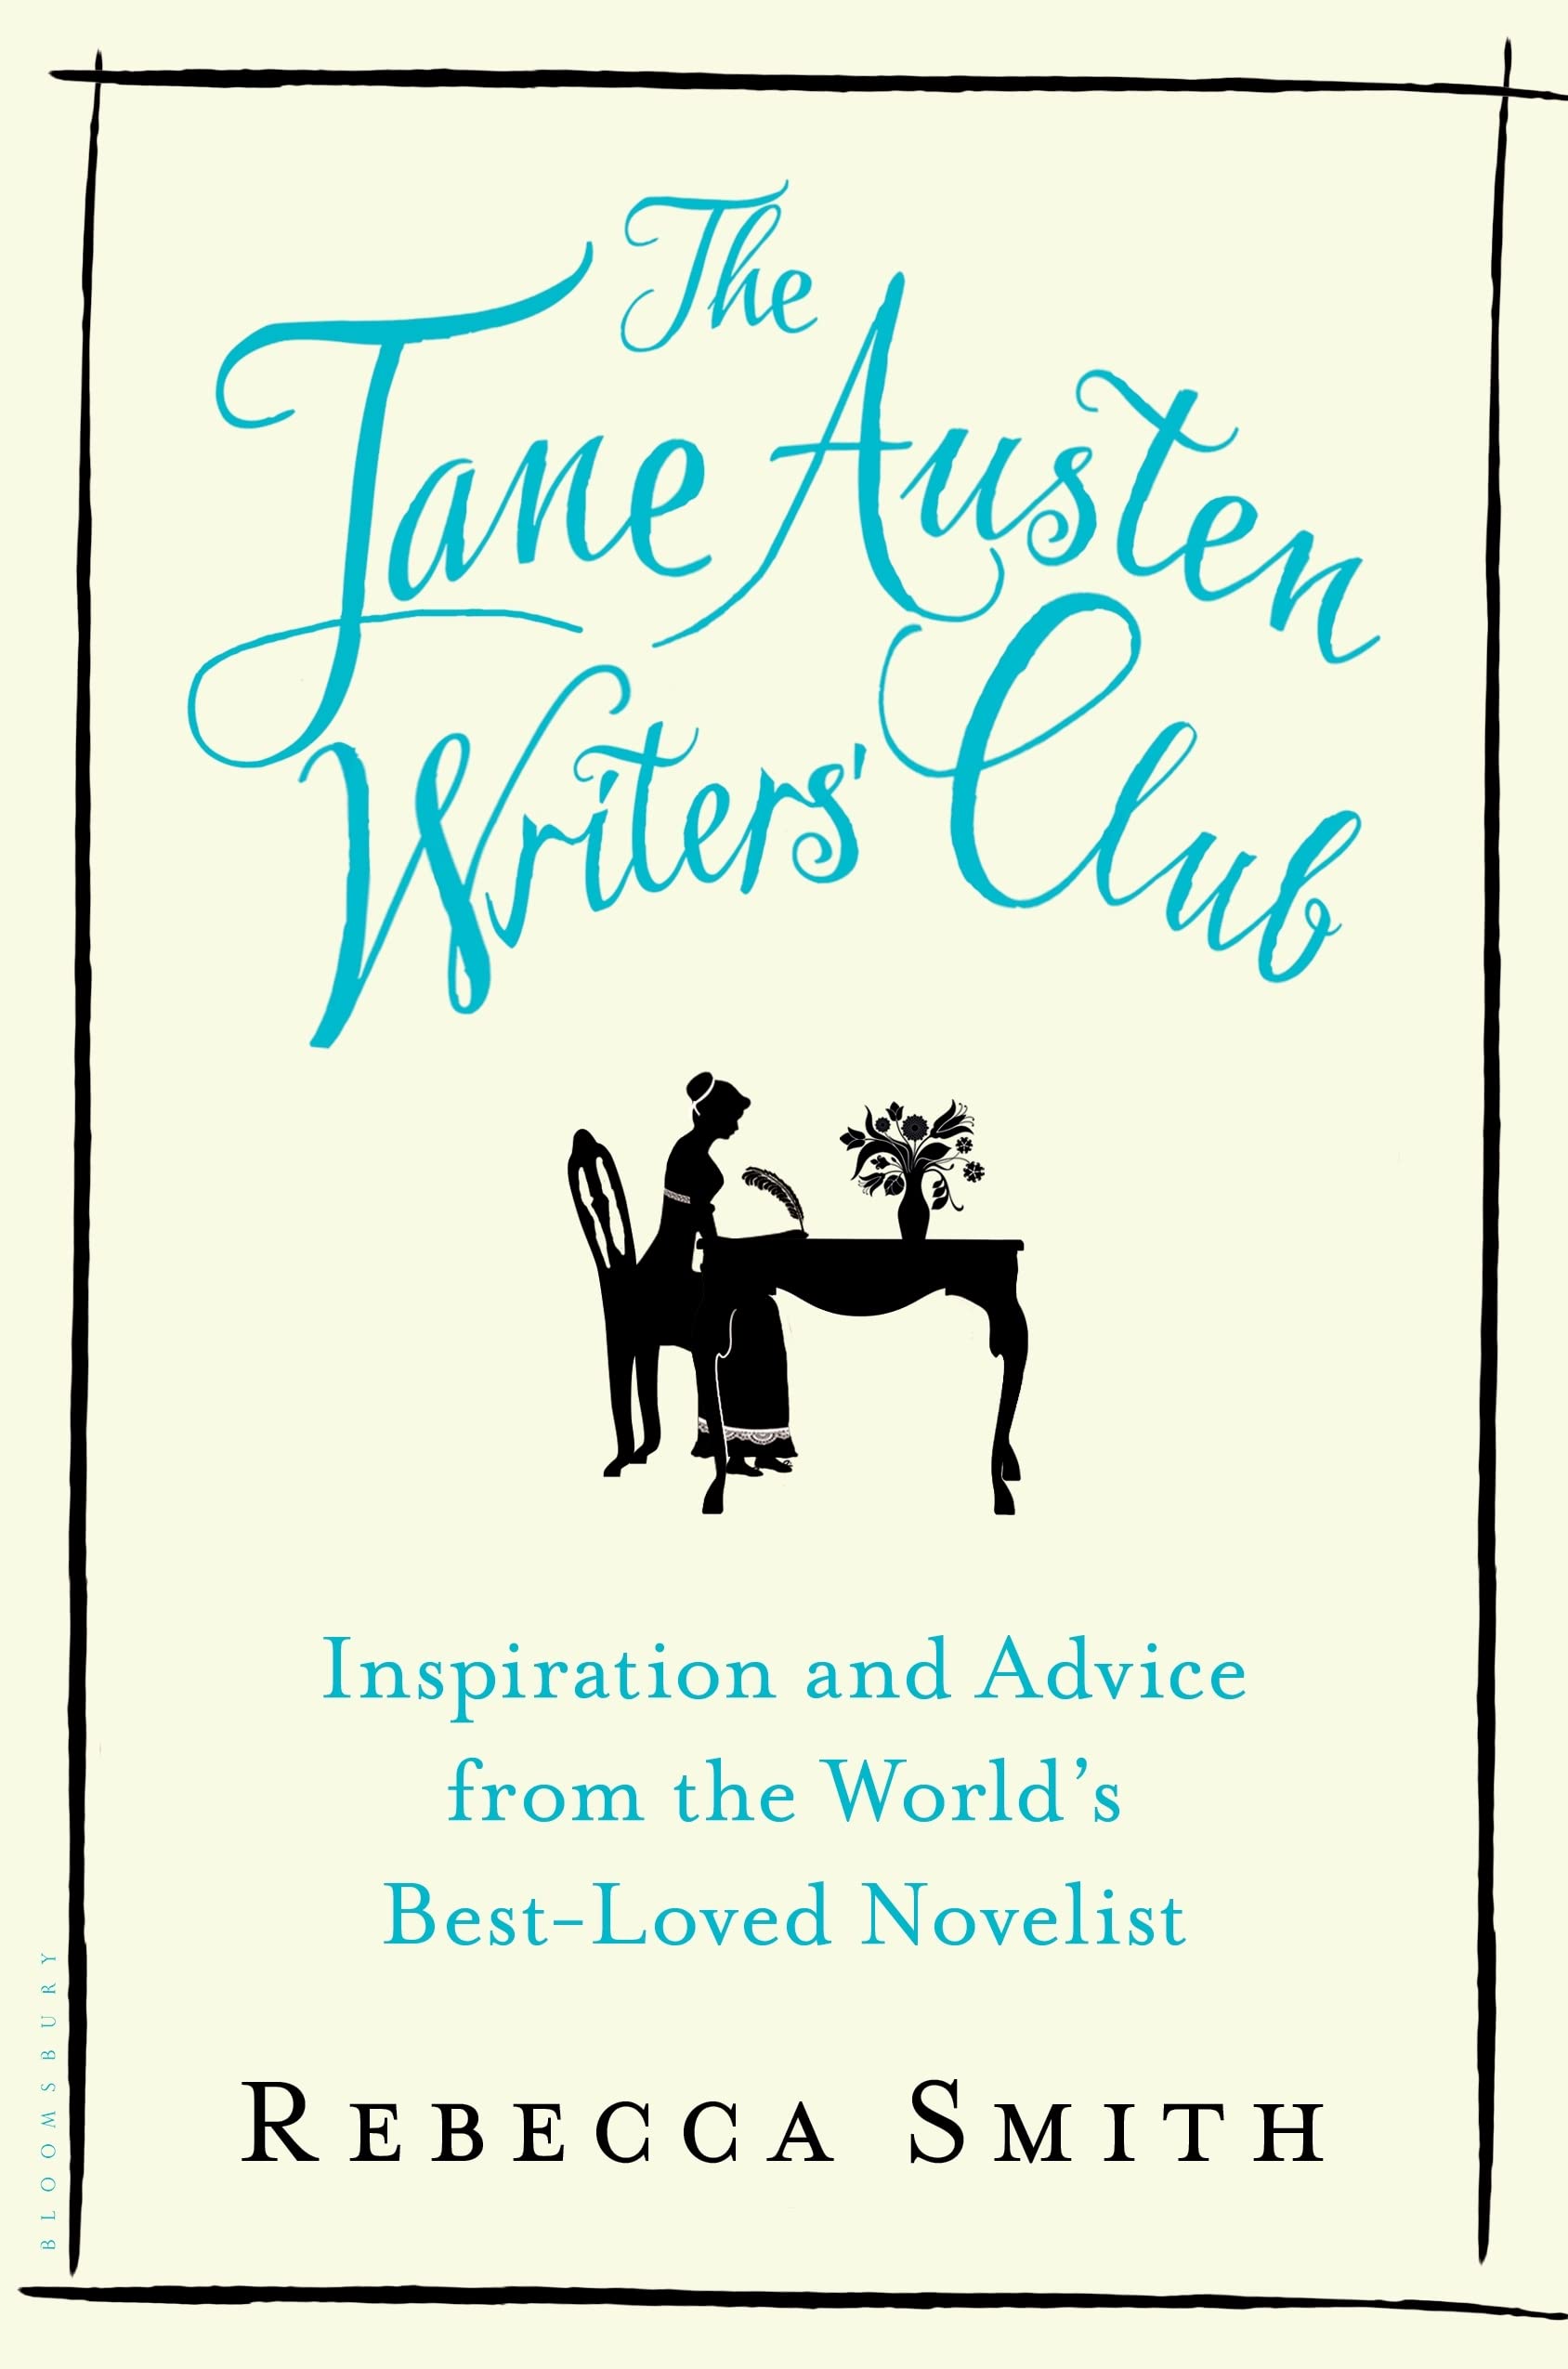 The Jane Austen Writers' Club book cover